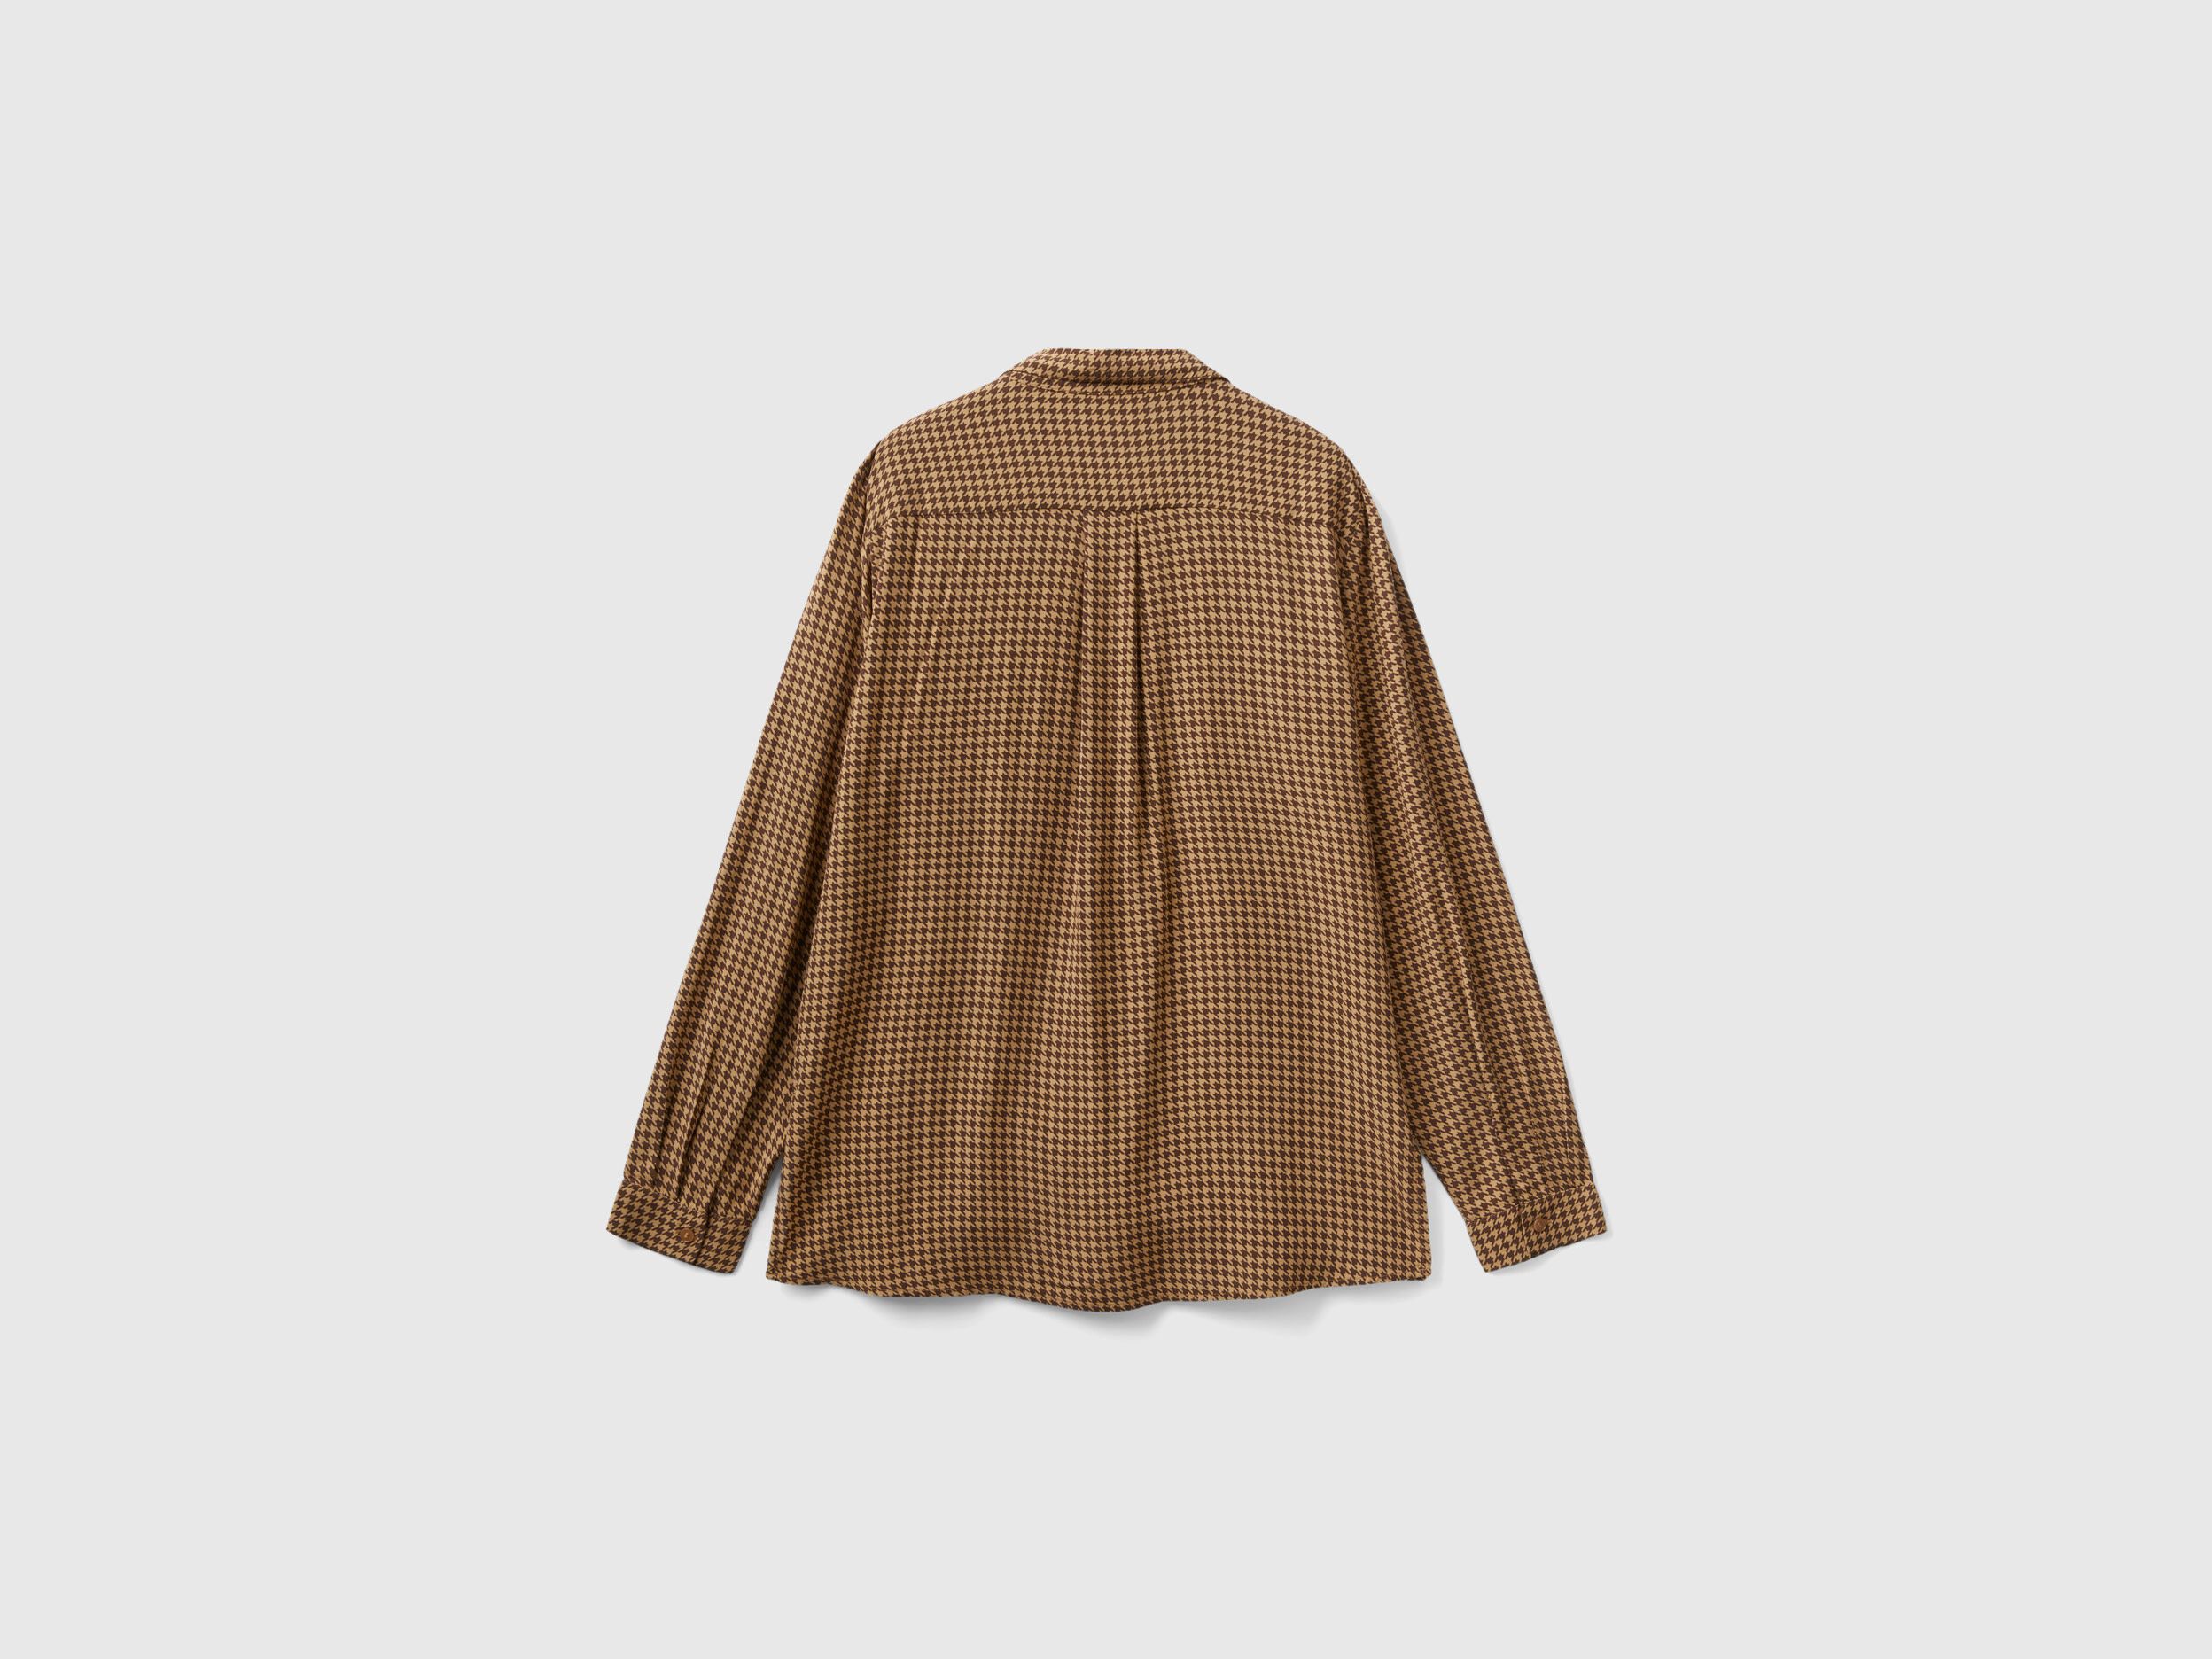 Patterned shirt in sustainable viscose - Brown | Benetton